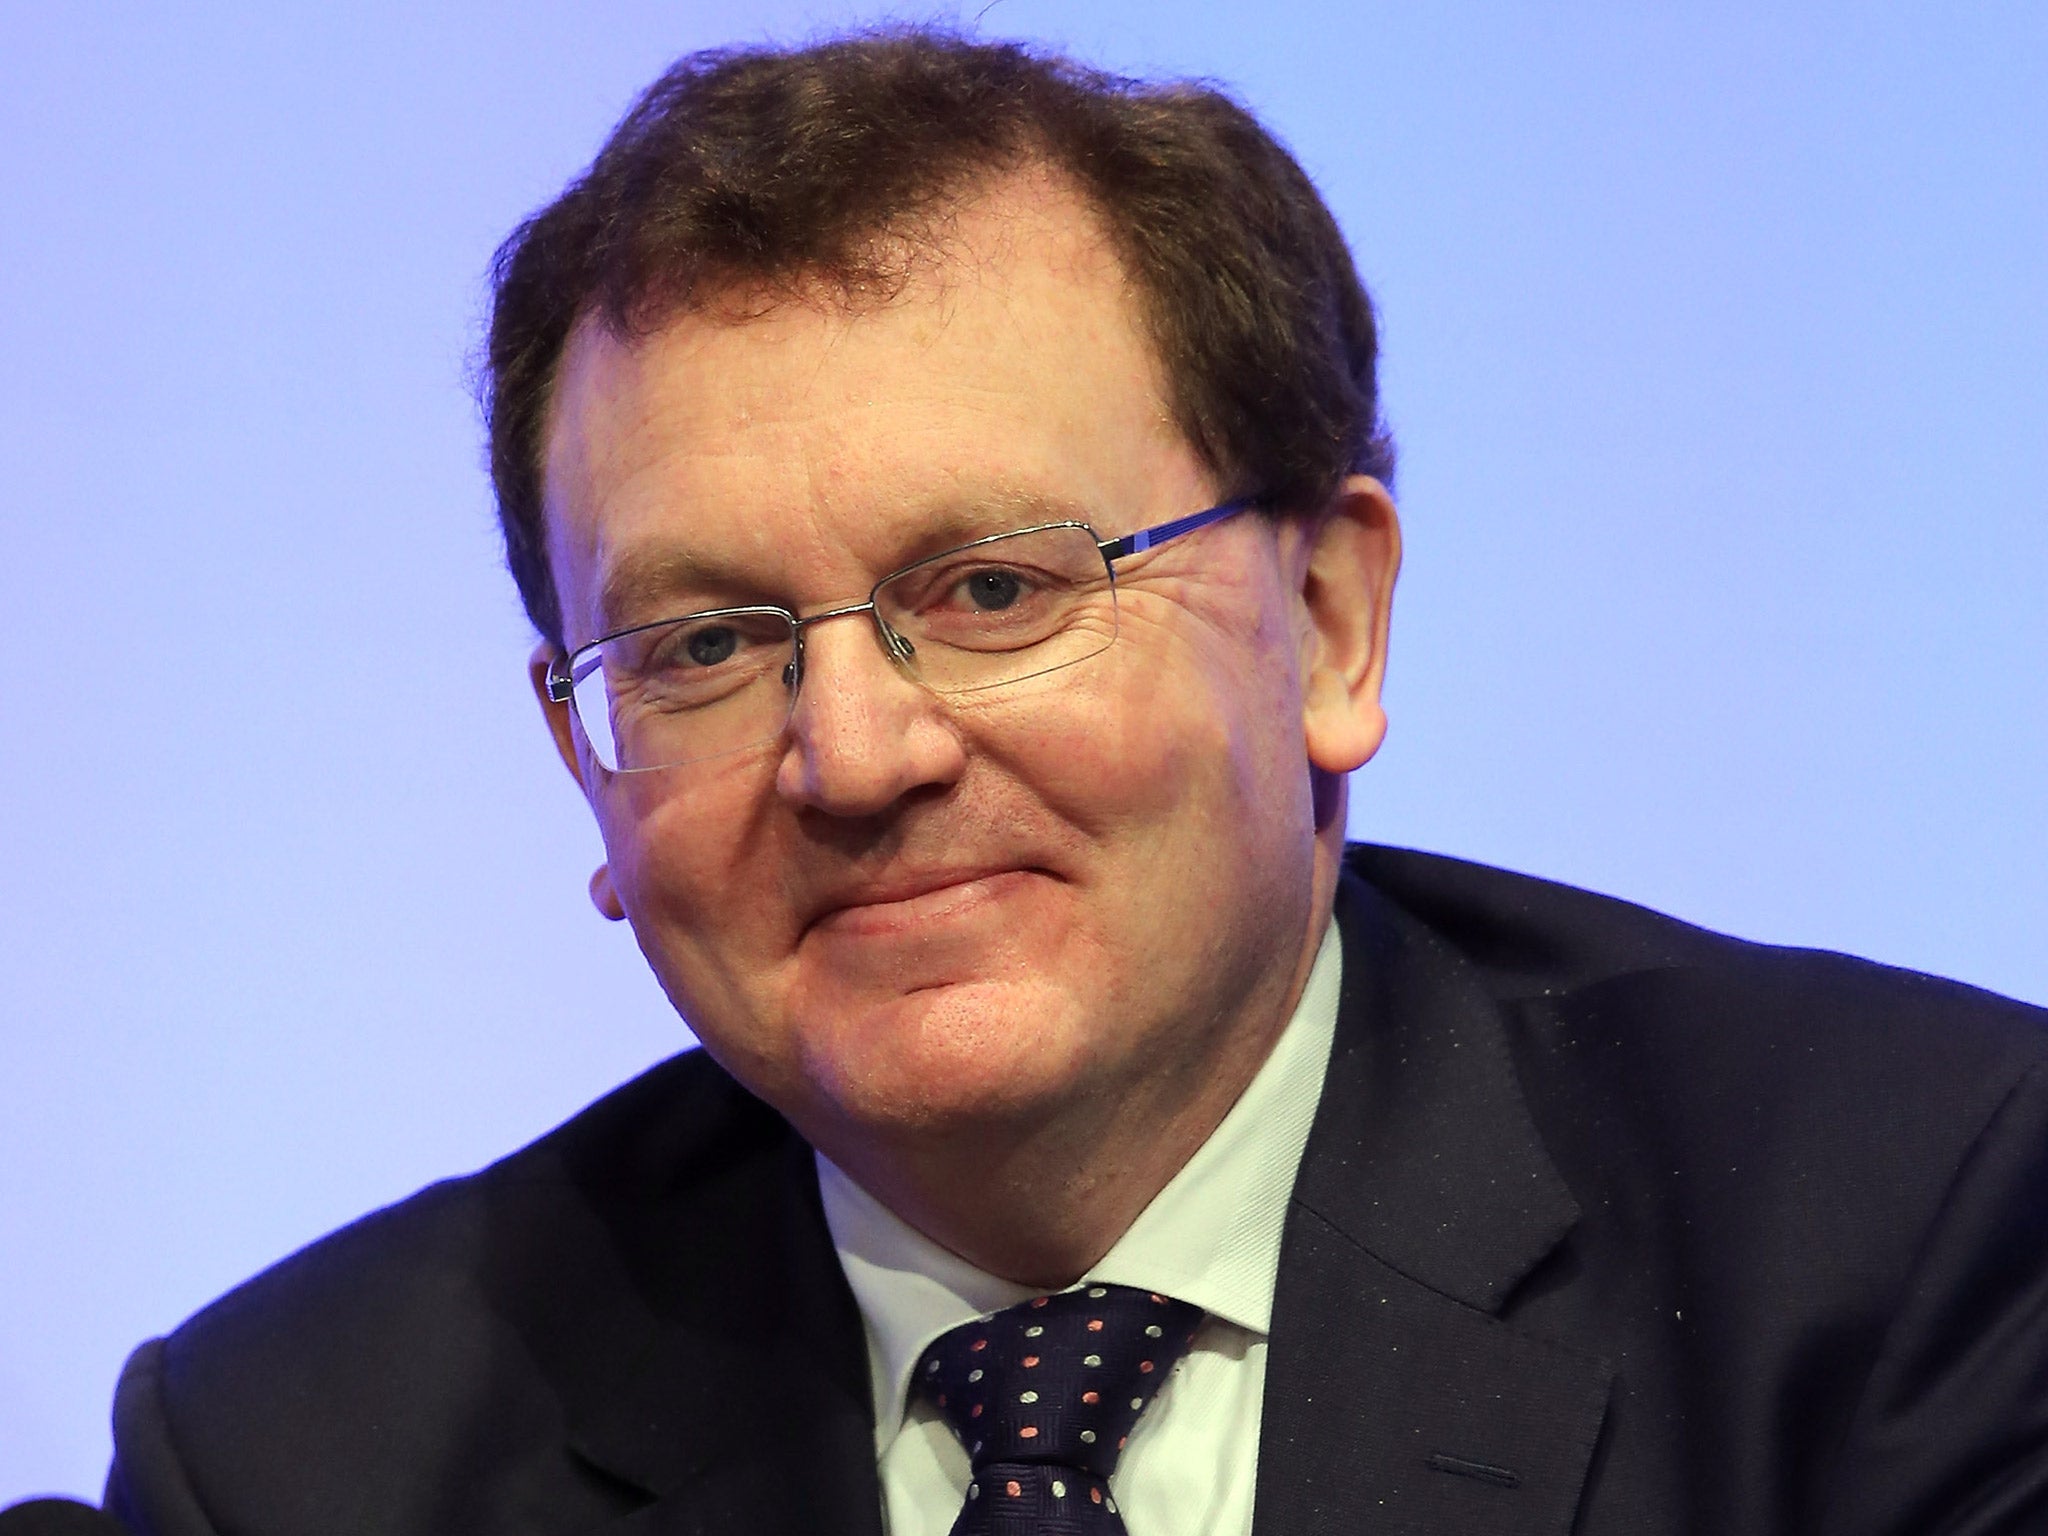 Since 2005, David Mundell has been Scotland’s only Tory MP